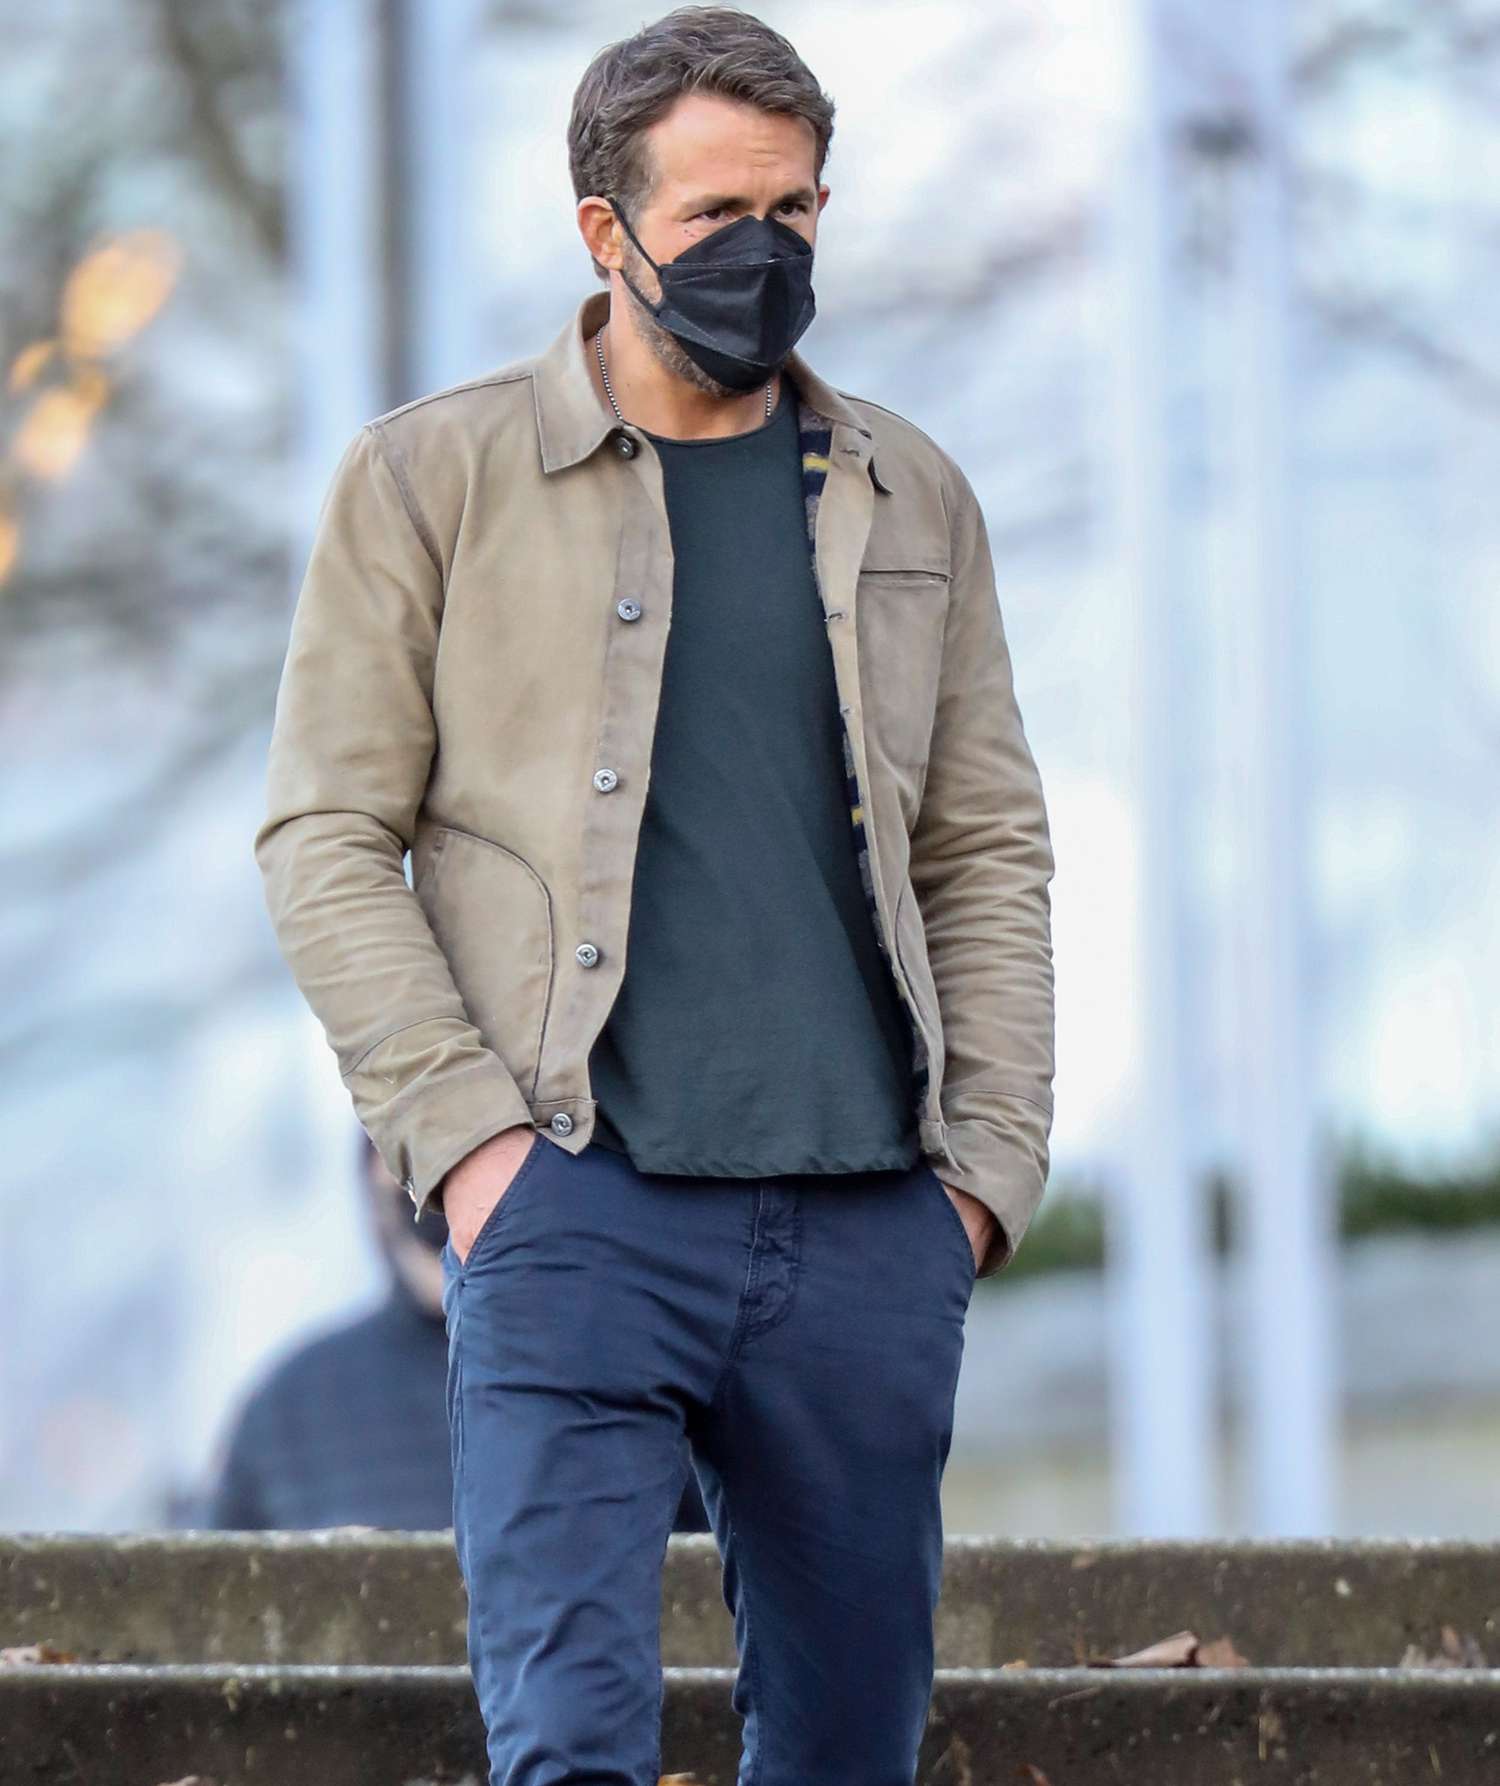 Ryan Reynolds is Spotted on Set of His Latest Netflix Film, 'The Adam Project' in Vancouver, Canada.